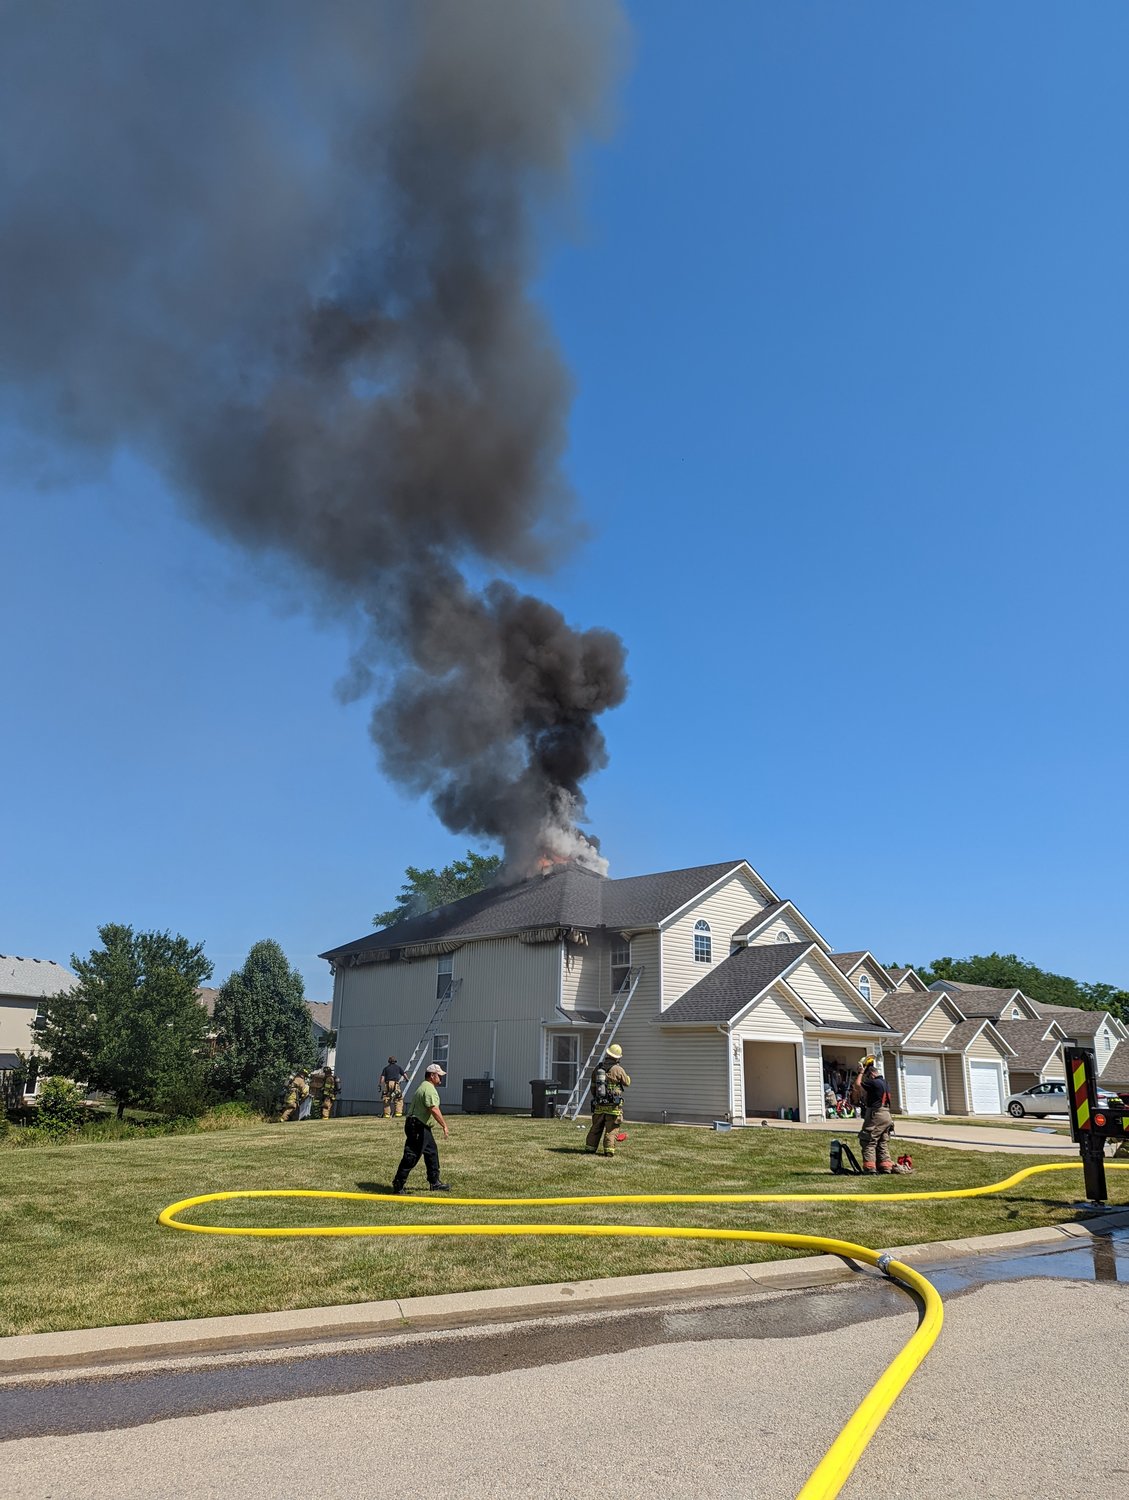 Firefighters work the scene of a structure fire Sunday, July 10, at a duplex in the 1200 block of Pebblecreek Drive.